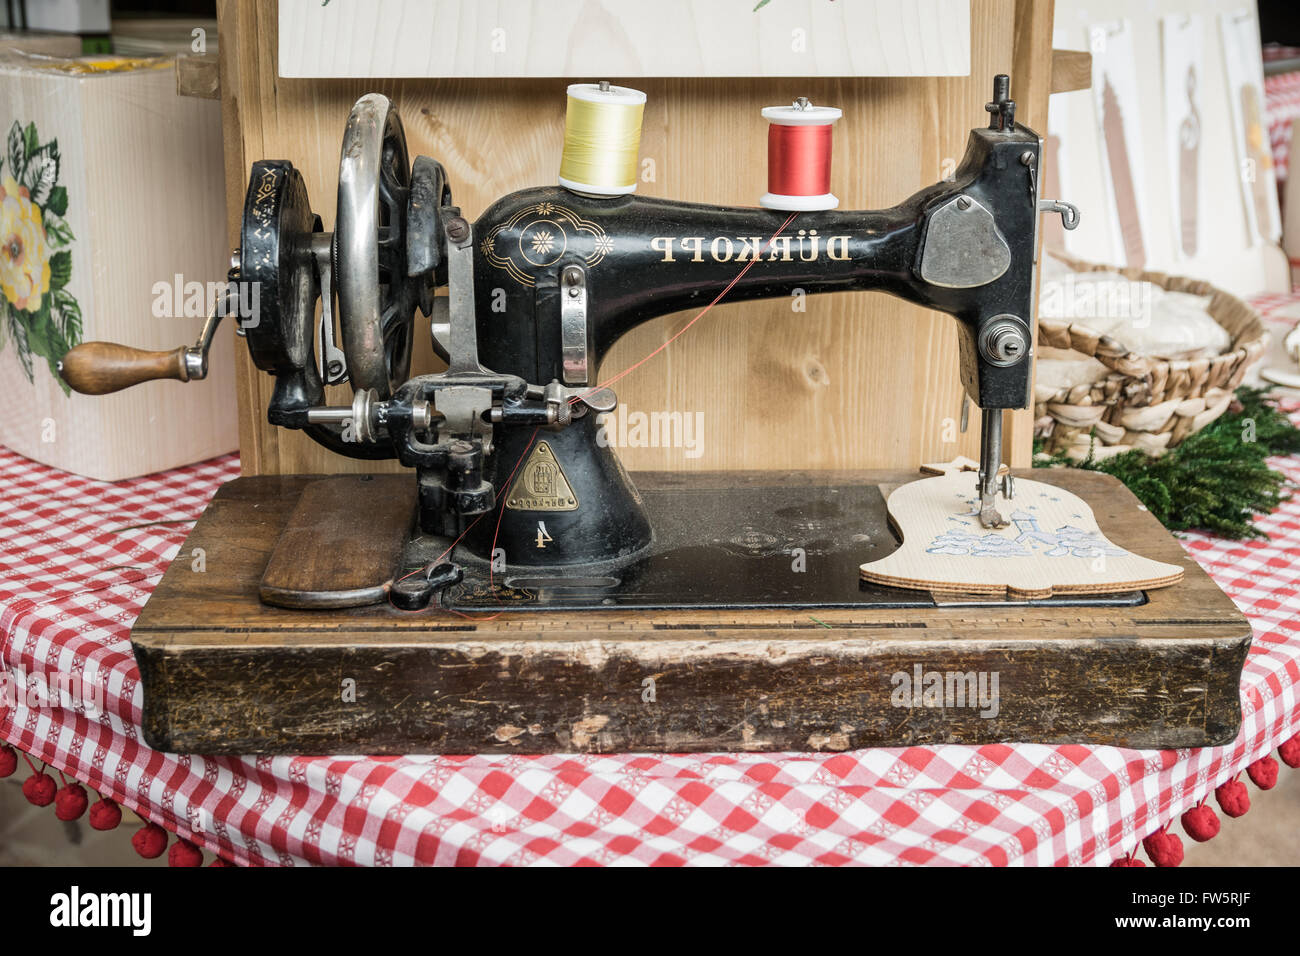 Trento, Italy - December 15, 2015: Old manual sewing machine used to embroider wooden shapes. Stock Photo